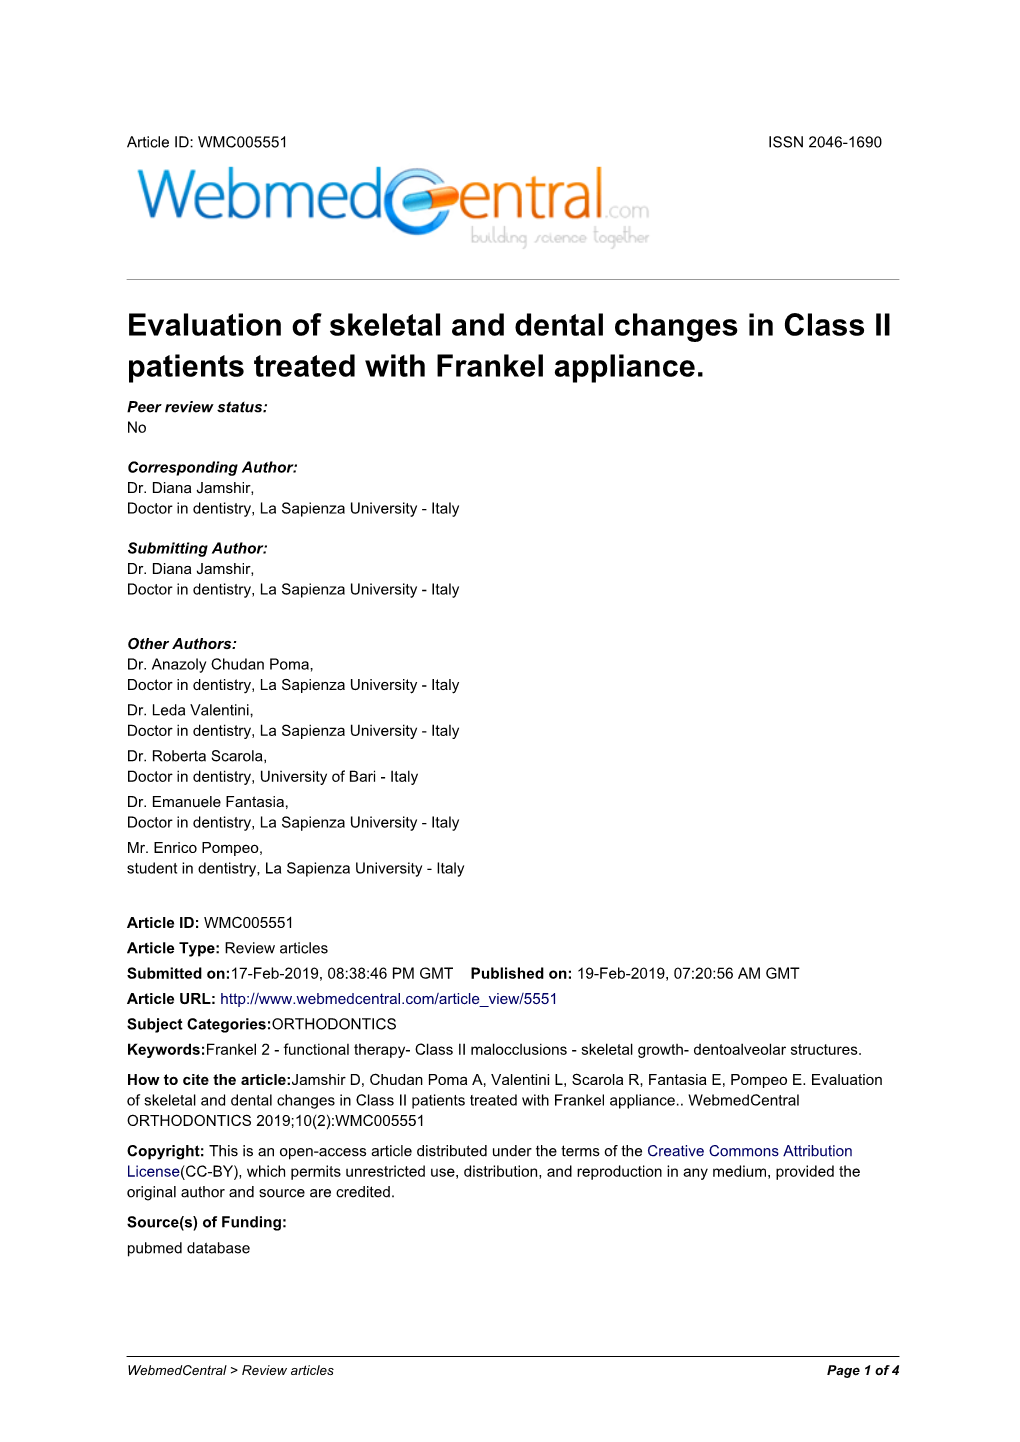 Evaluation of Skeletal and Dental Changes in Class II Patients Treated with Frankel Appliance